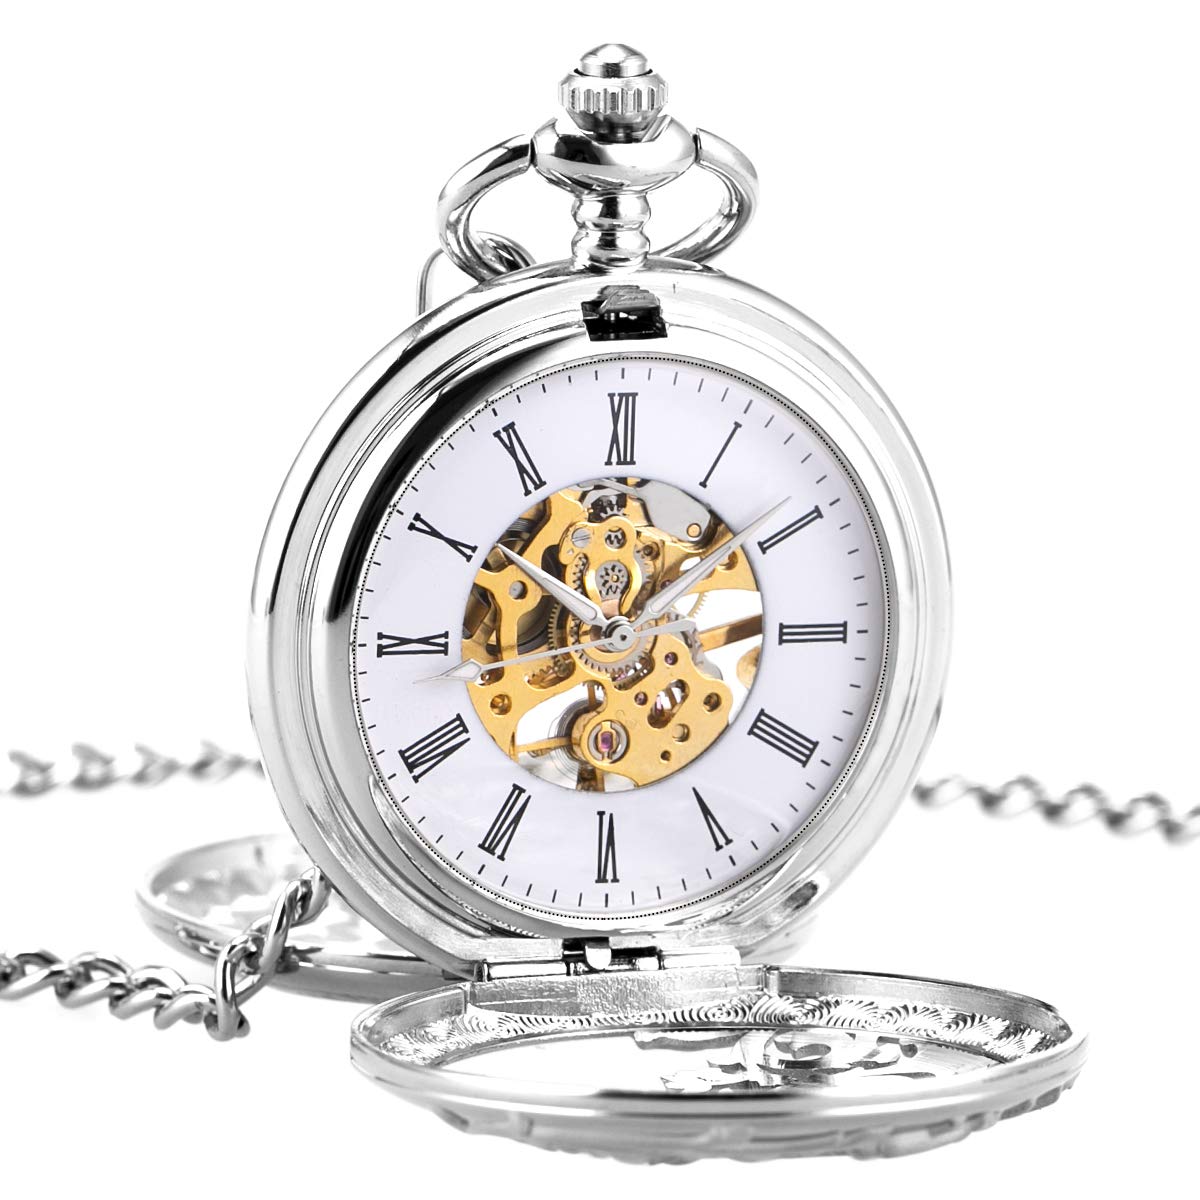 Mens Skeleton Mechanical Pocket Watch - Dragon Hollow Double Hunter Black Roman Numerals White Dial with Chain + Gift Box